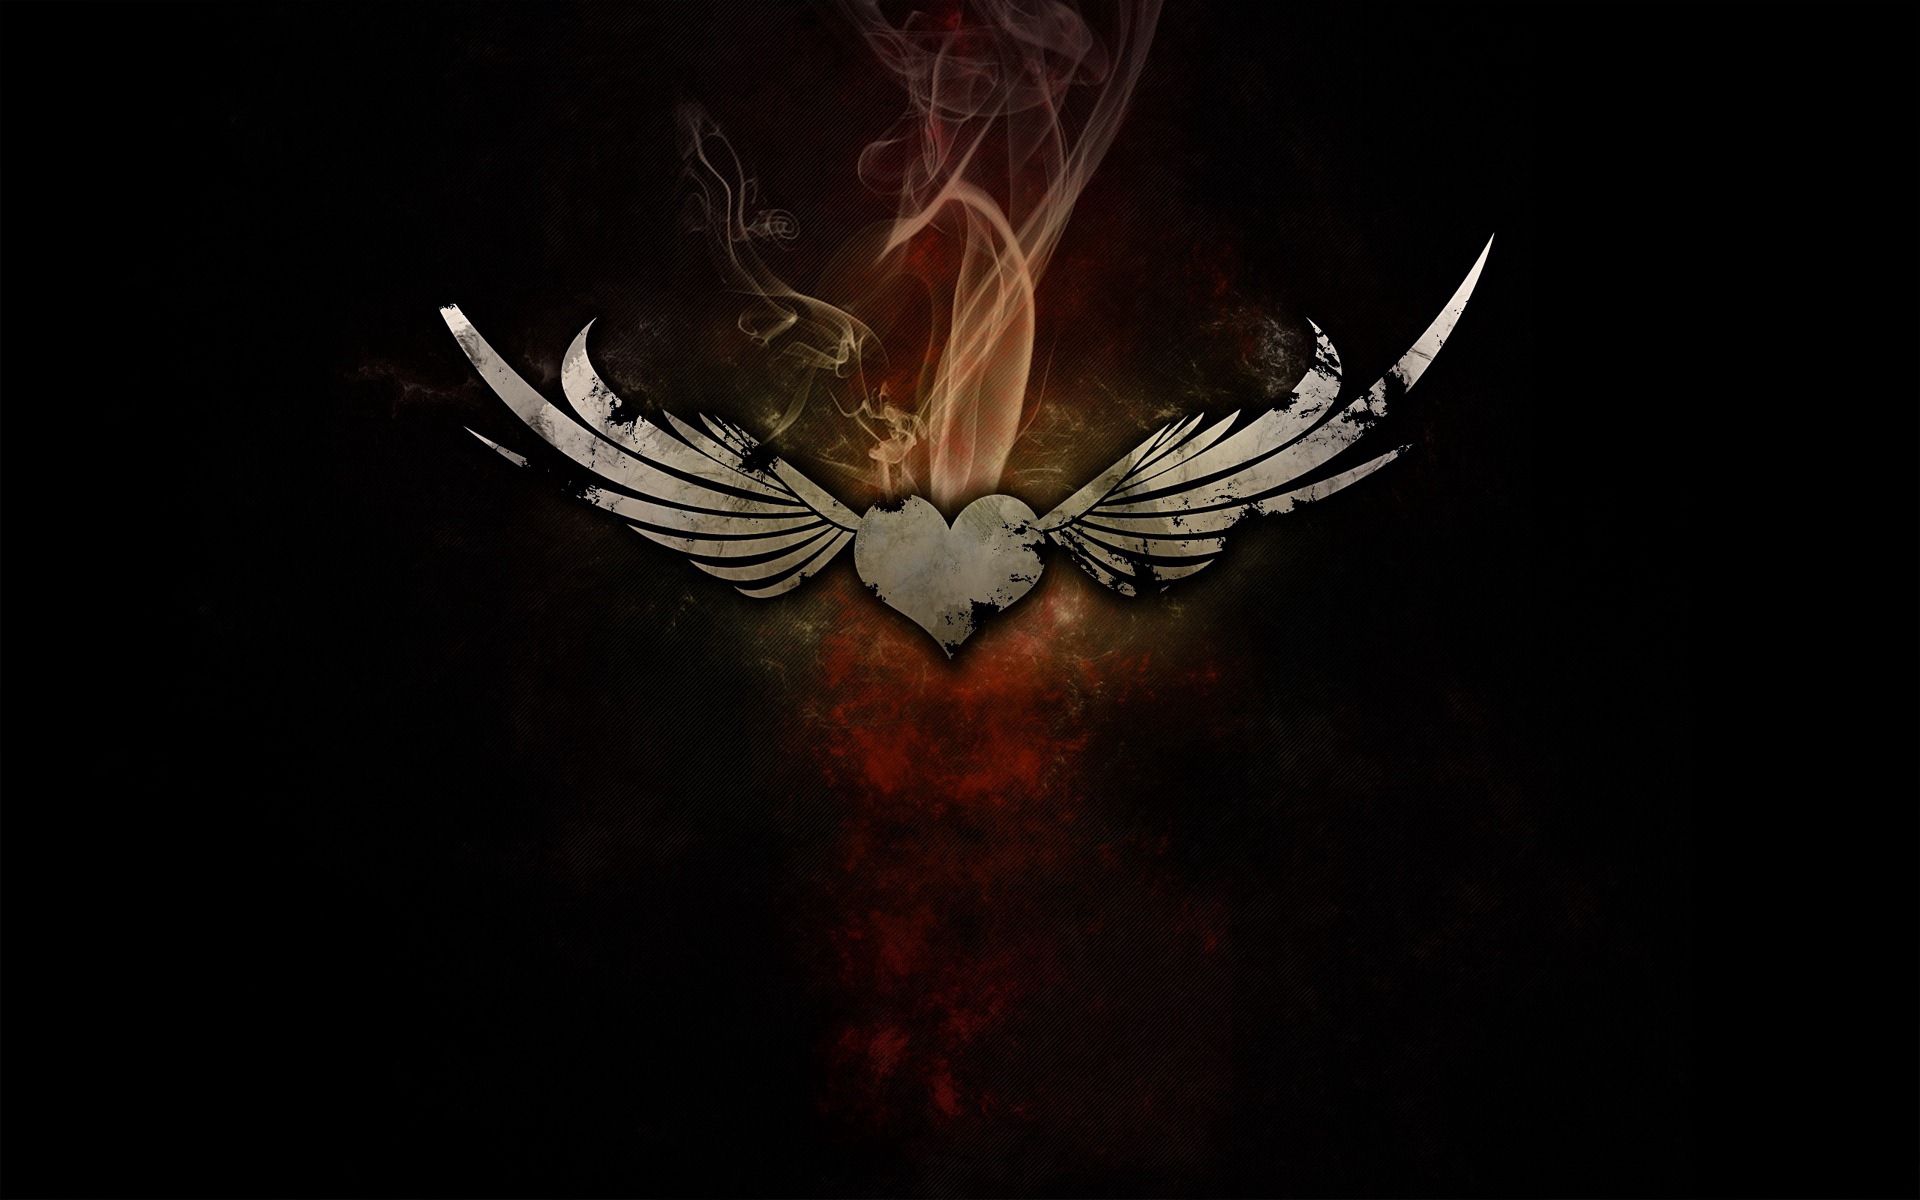 heart, abstract, smoke, dark background, wings images